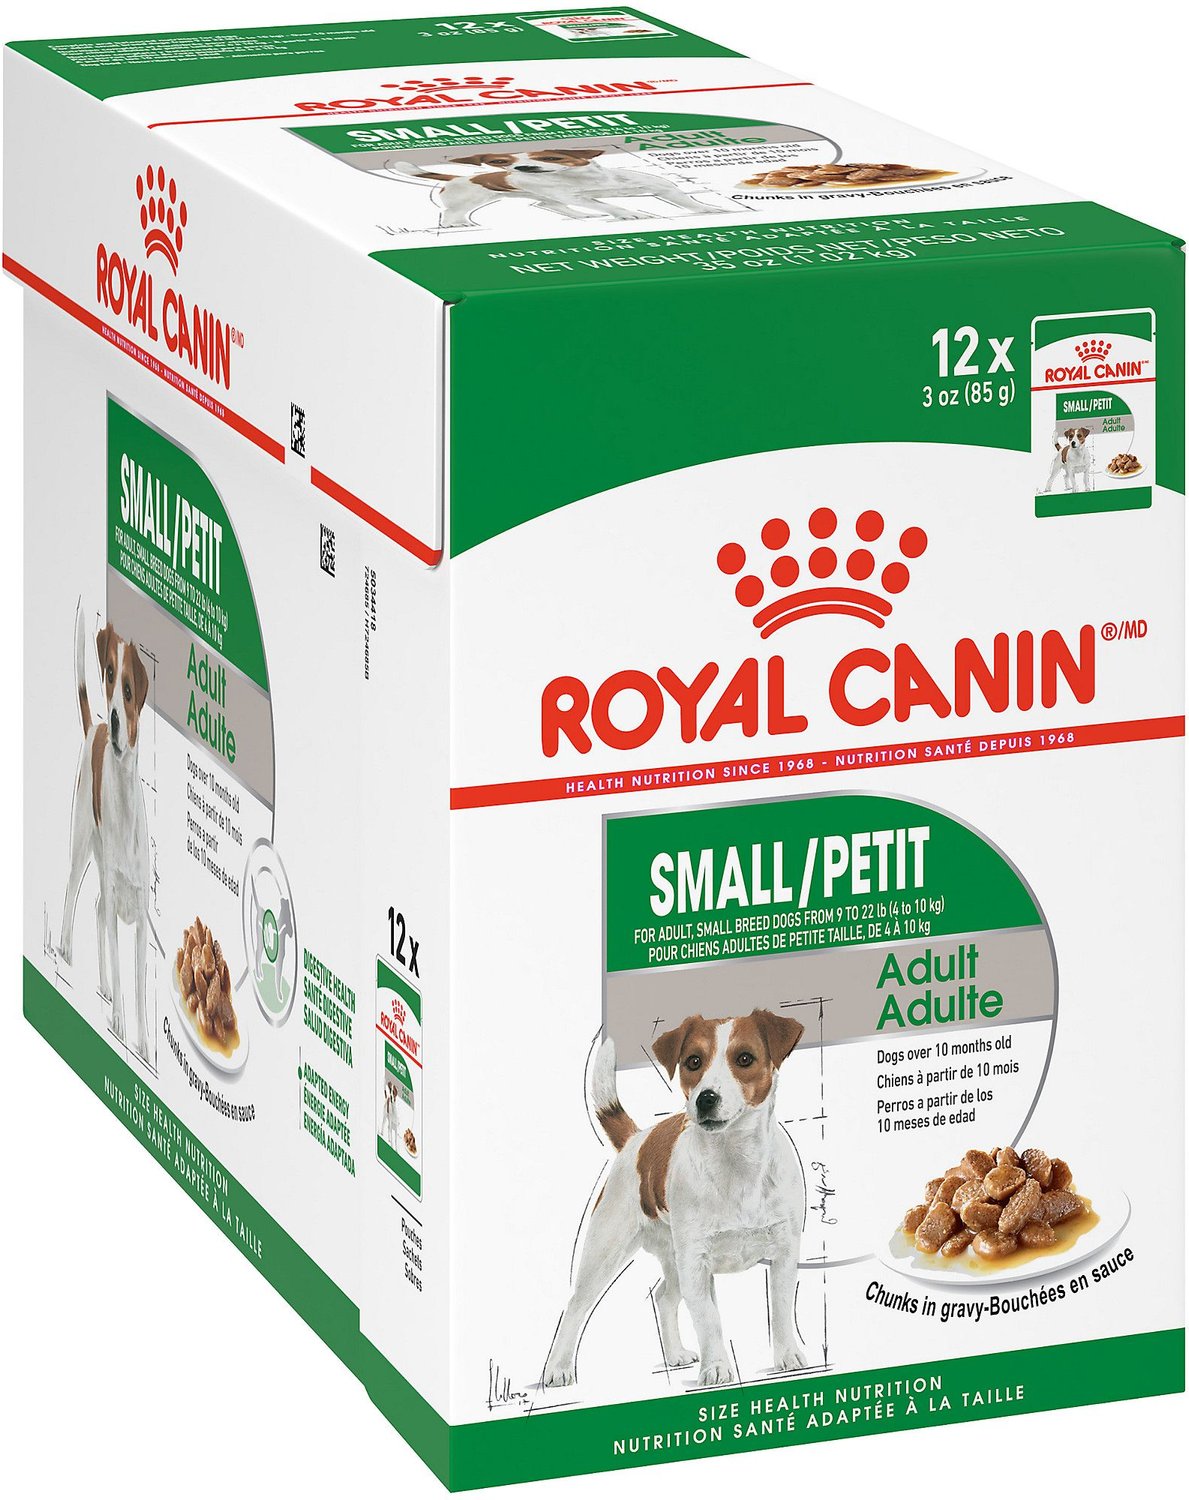 ROYAL CANIN Small Adult Wet Dog Food, 3oz pouch, case of